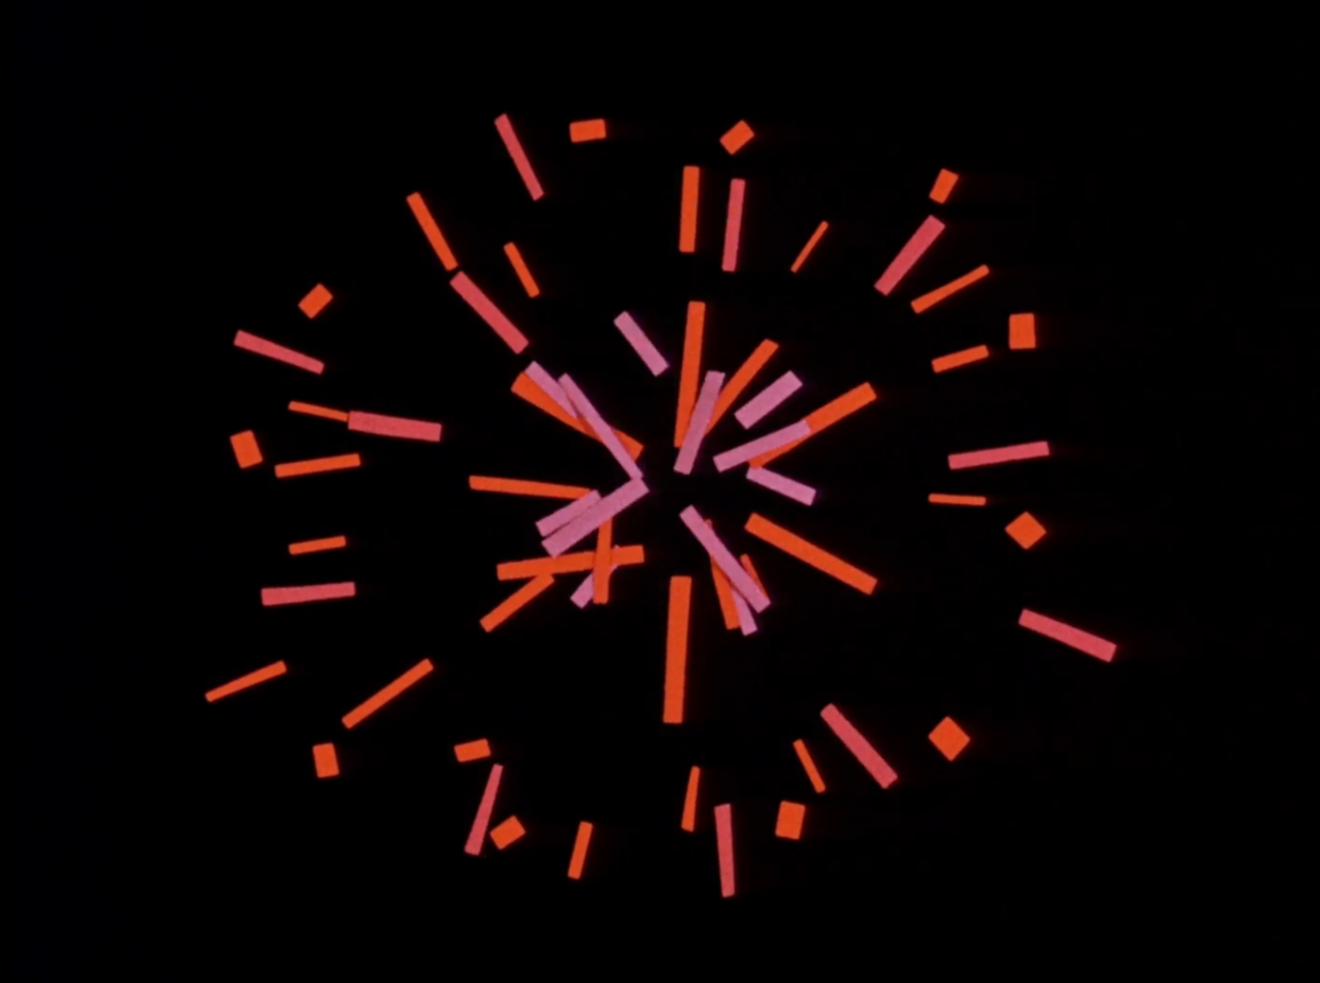 still from paper cut animation depicting red and pink scraps of paper on a black background bursting apart like a firework